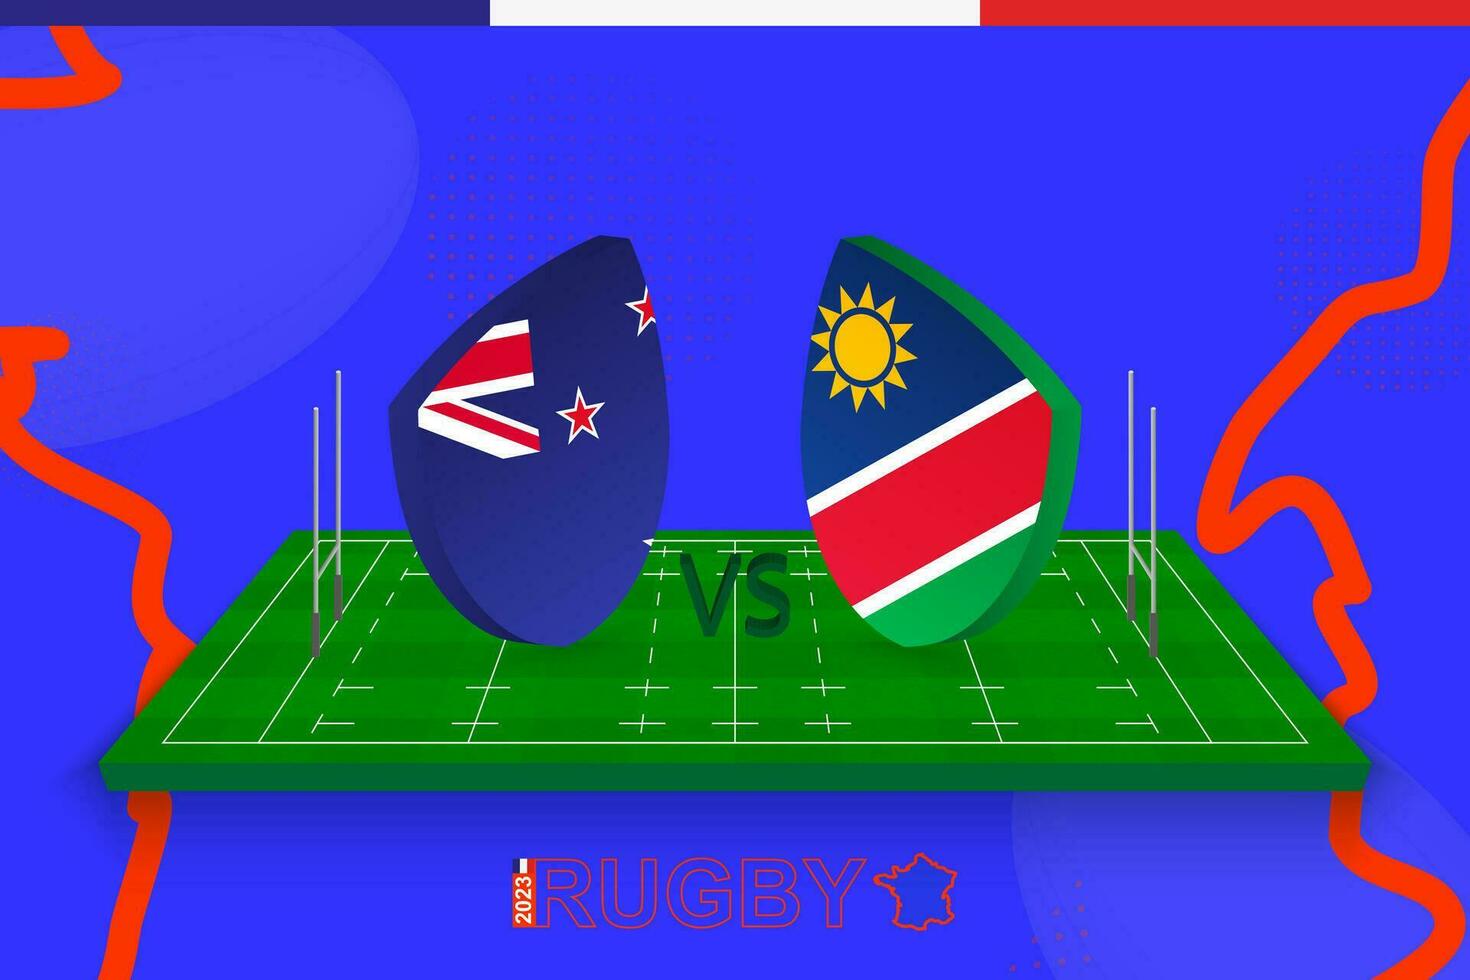 Rugby team New Zealand vs Namibia on rugby field. Rugby stadium on abstract background for international championship. vector